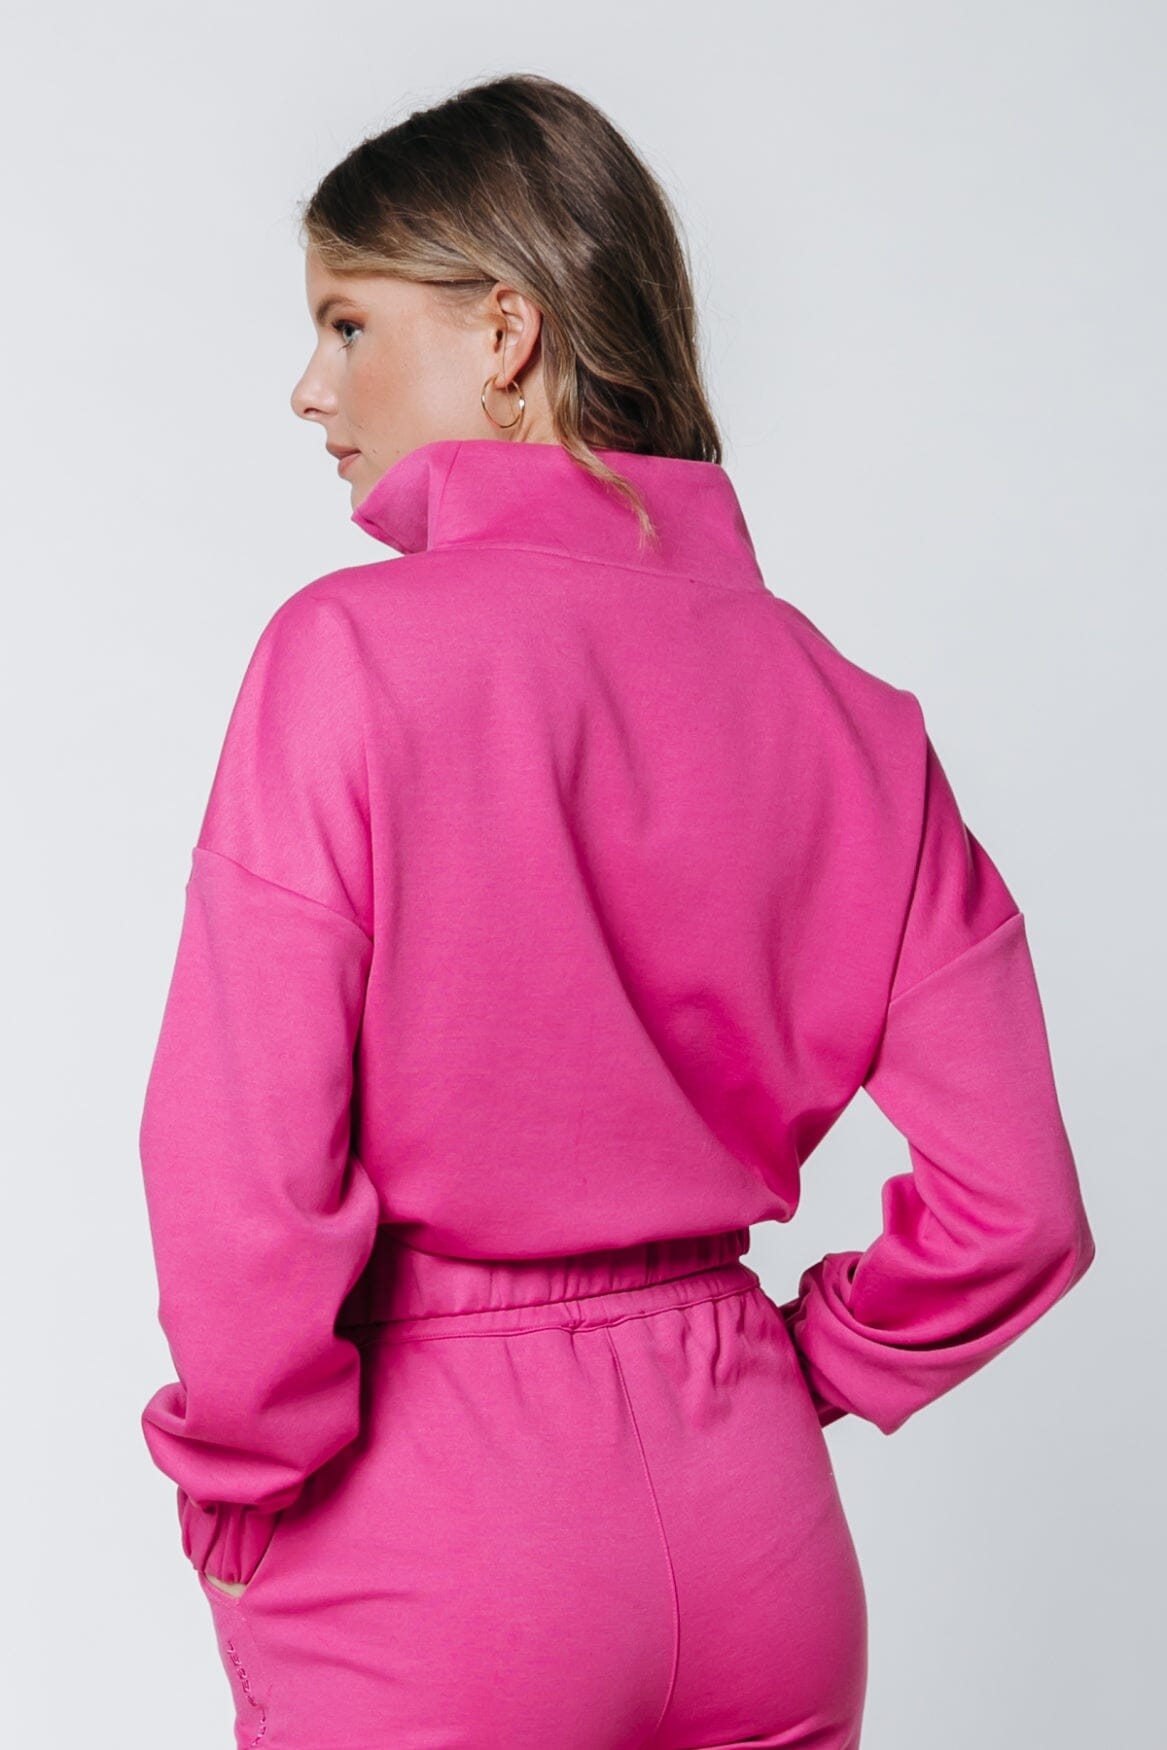 Colourful Rebel Litzy Dropped Shoulder Zipper Sweater | Sweet Pink